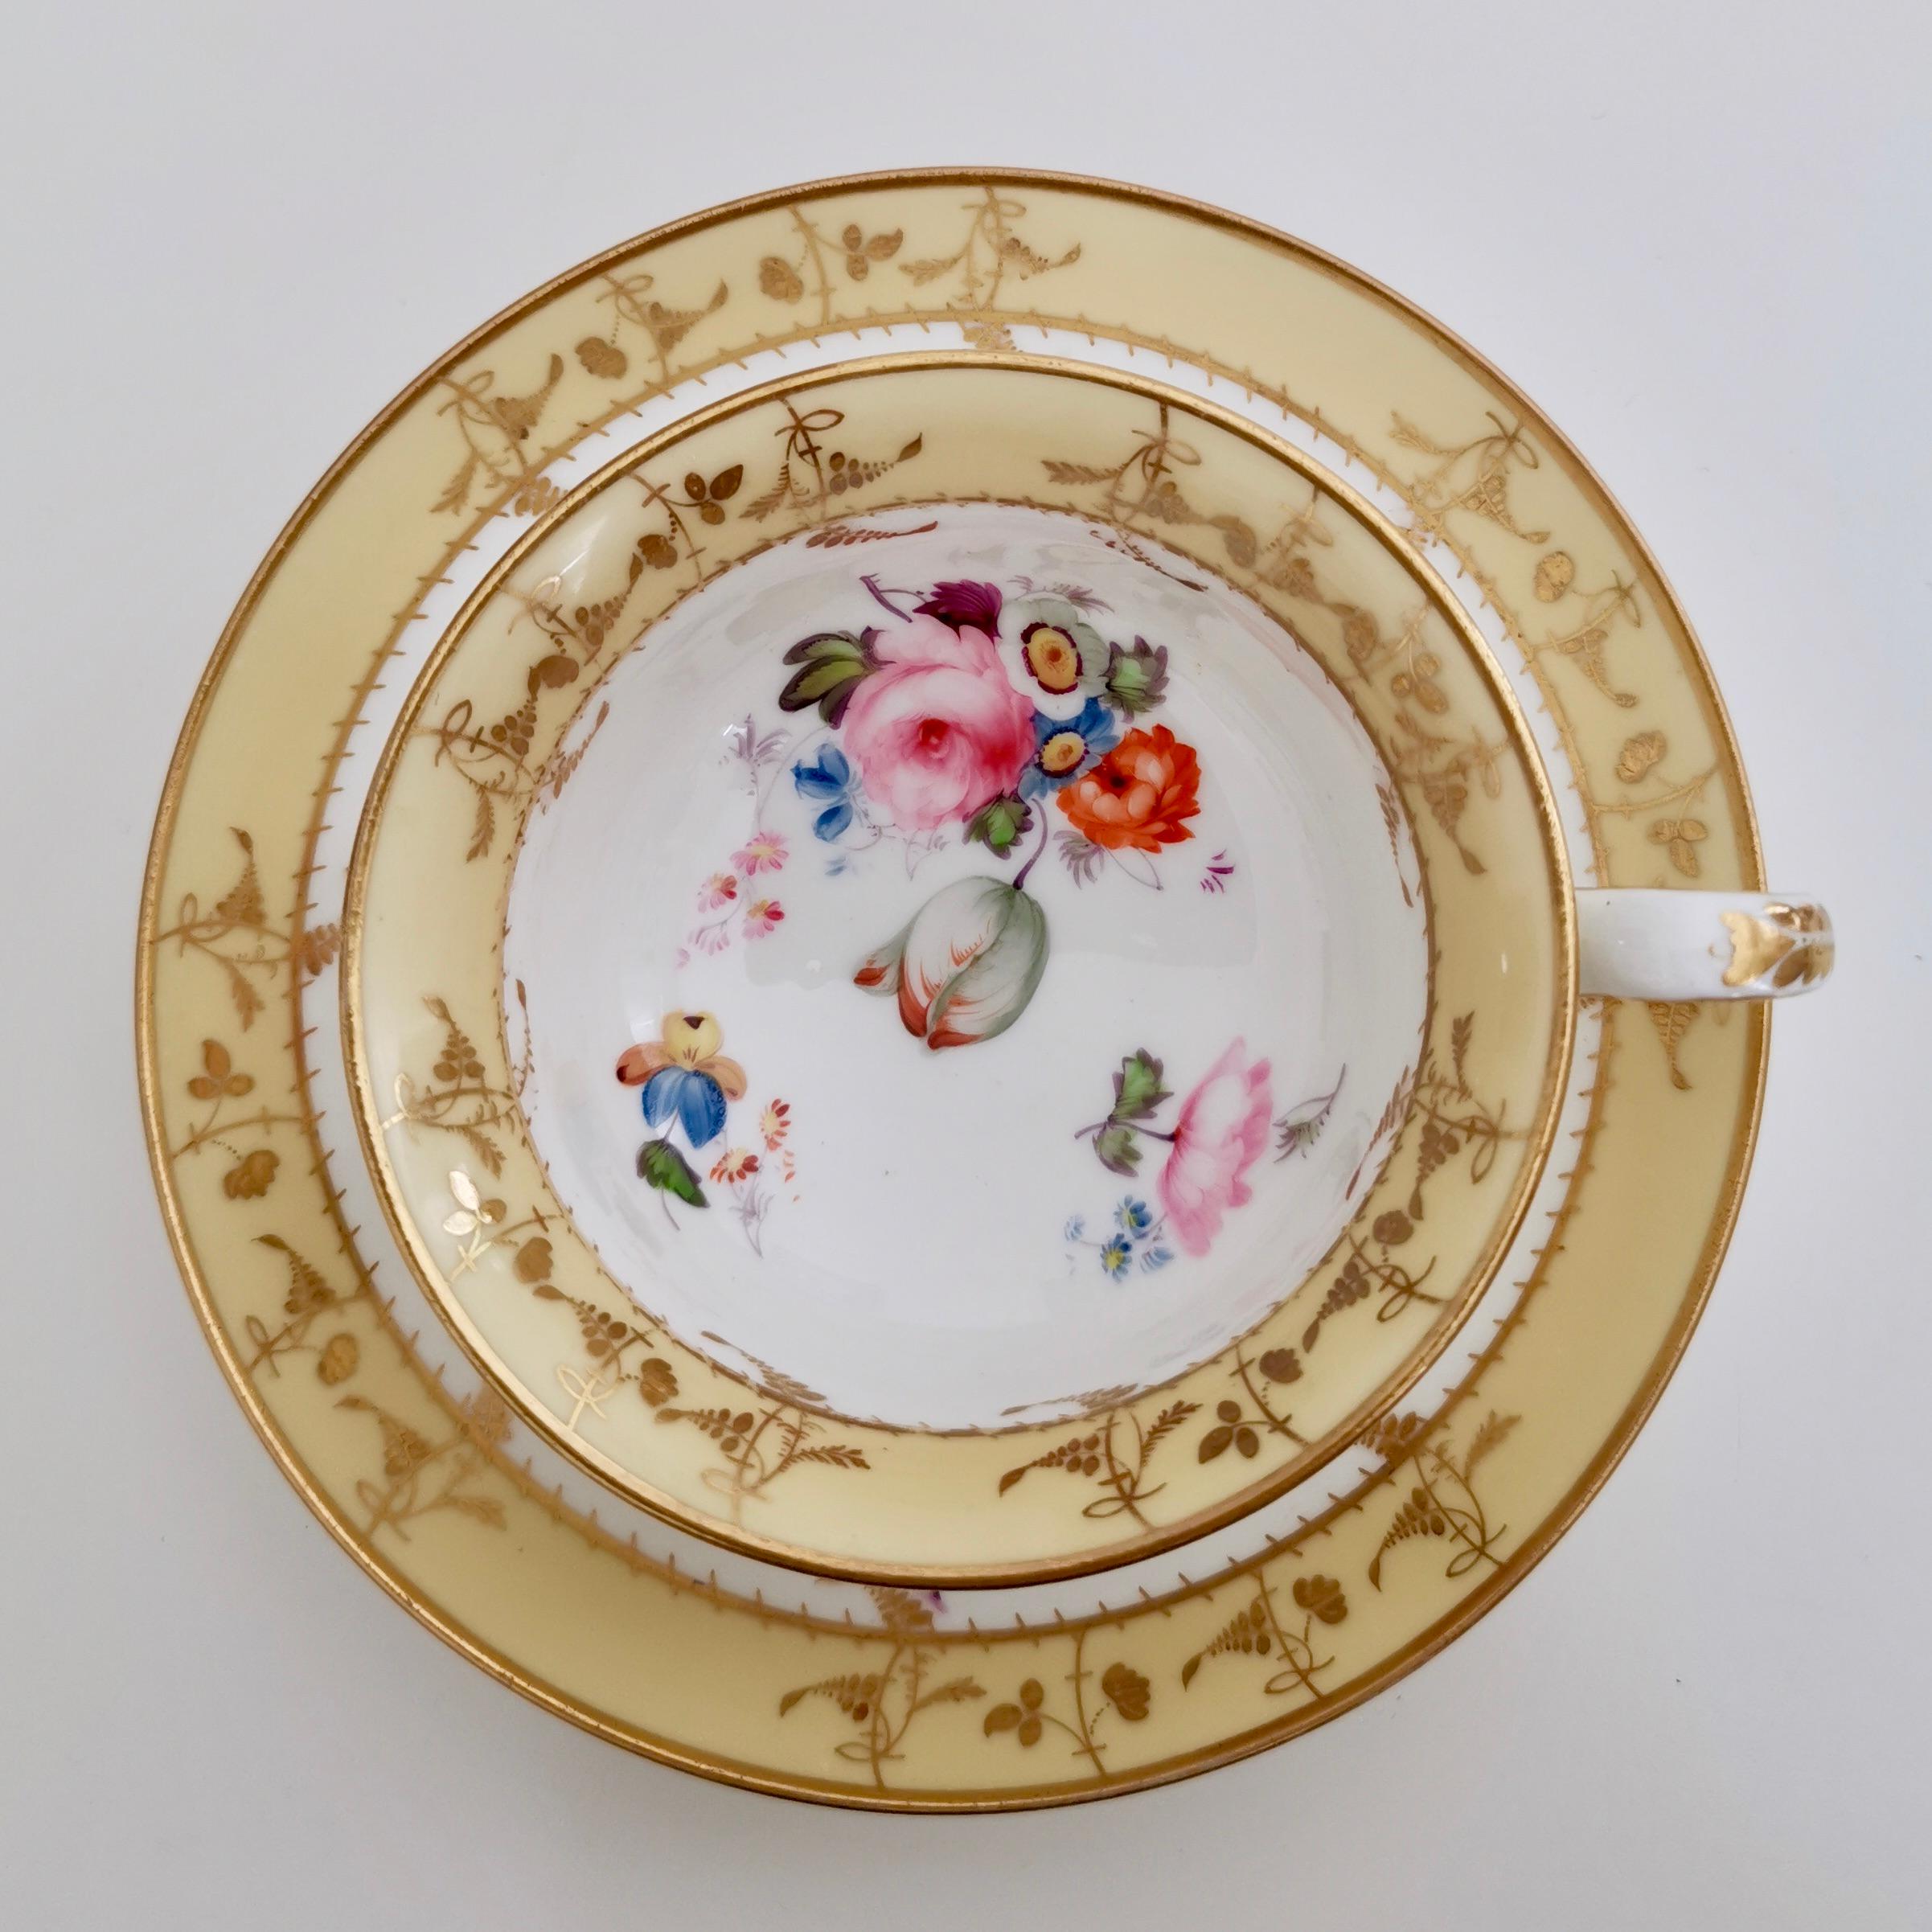 English Minton Porcelain Teacup, Yellow with Hand Painted Flowers, Regency, circa 1825